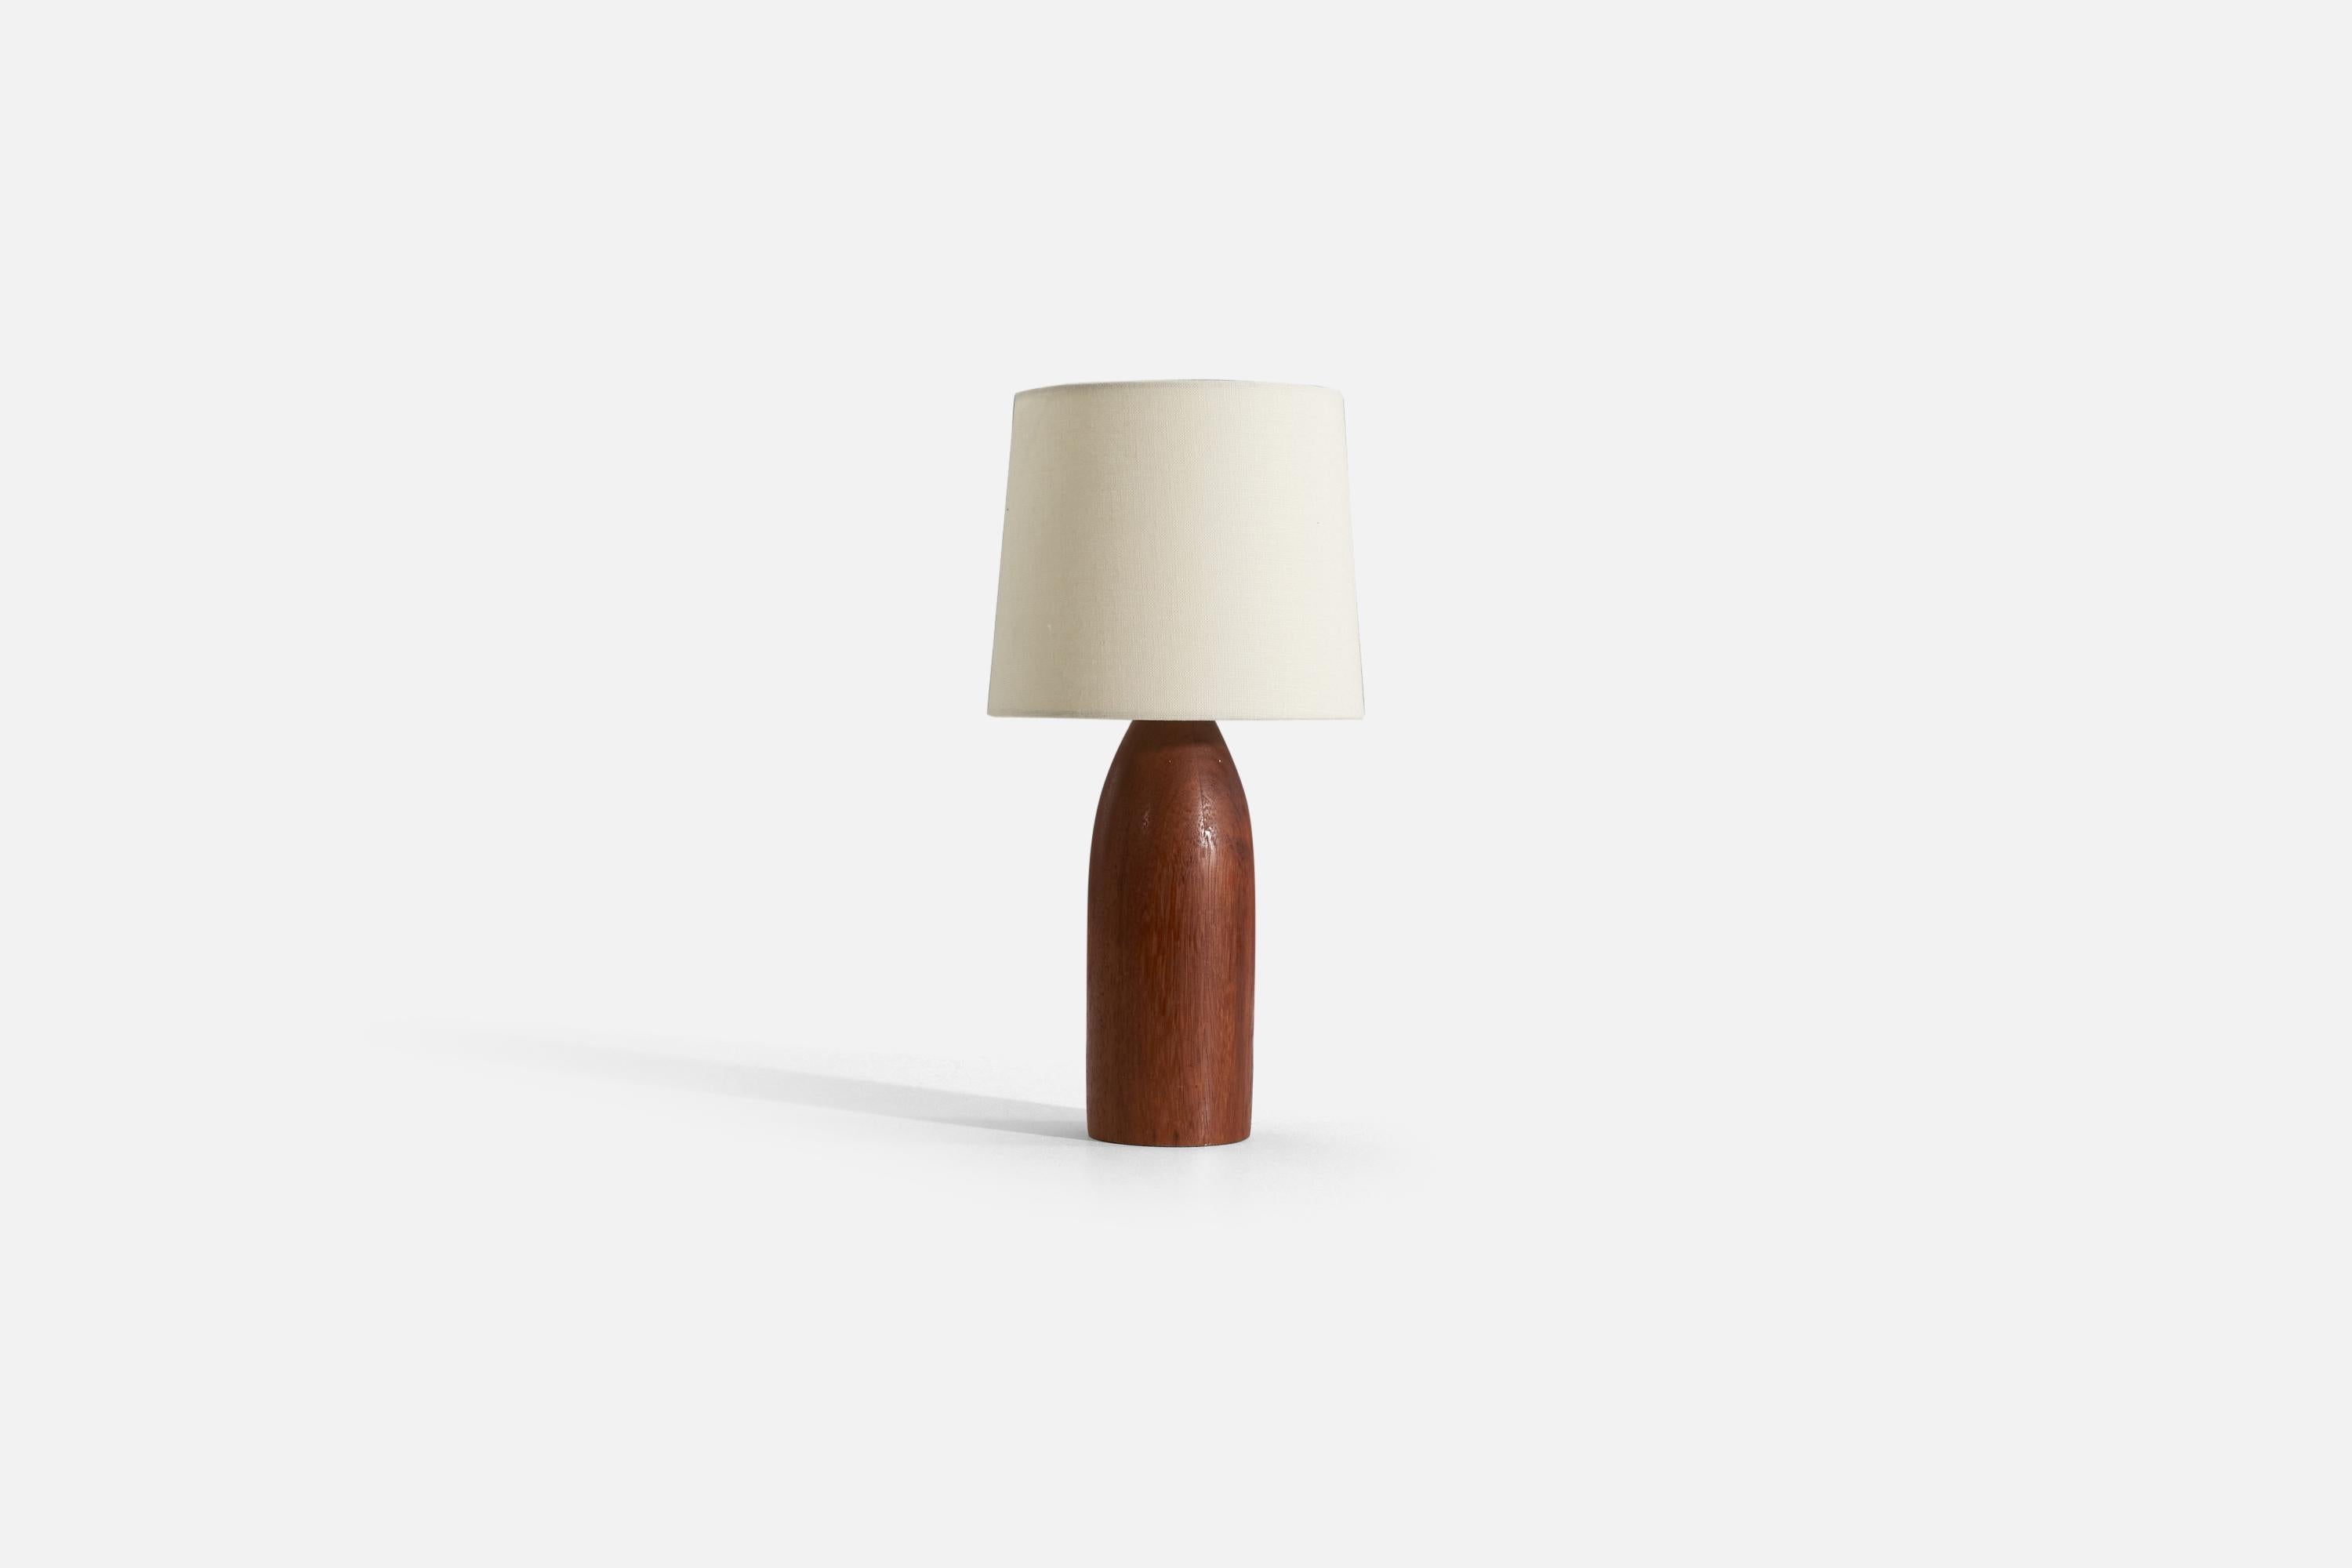 A teak table lamp produced by a Swedish designer, Sweden, 1950s.

Sold without lampshade. 

Measurements listed are of lamp only 
Shade : 7 x 8 x 7
Lamp with shade : 16 x 8 x 8.